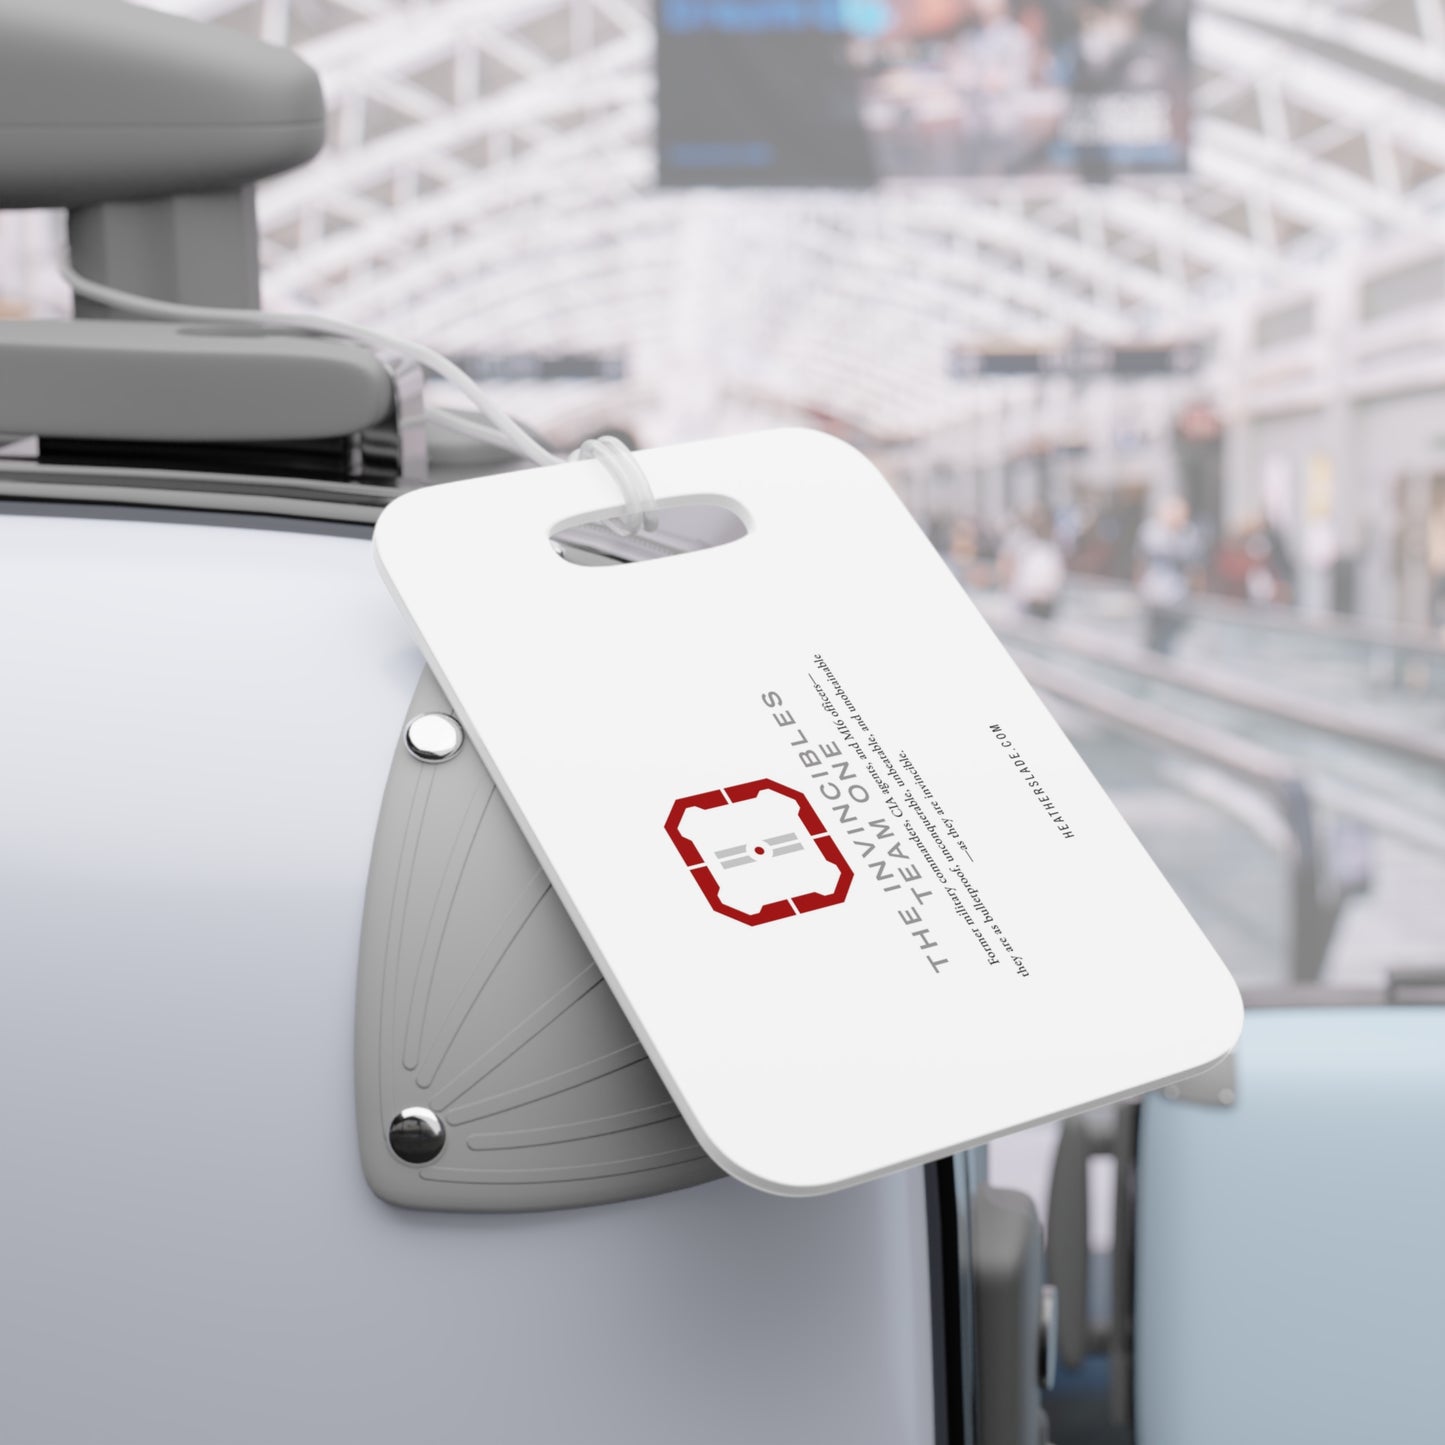 The Invincibles Team One Luggage Tags